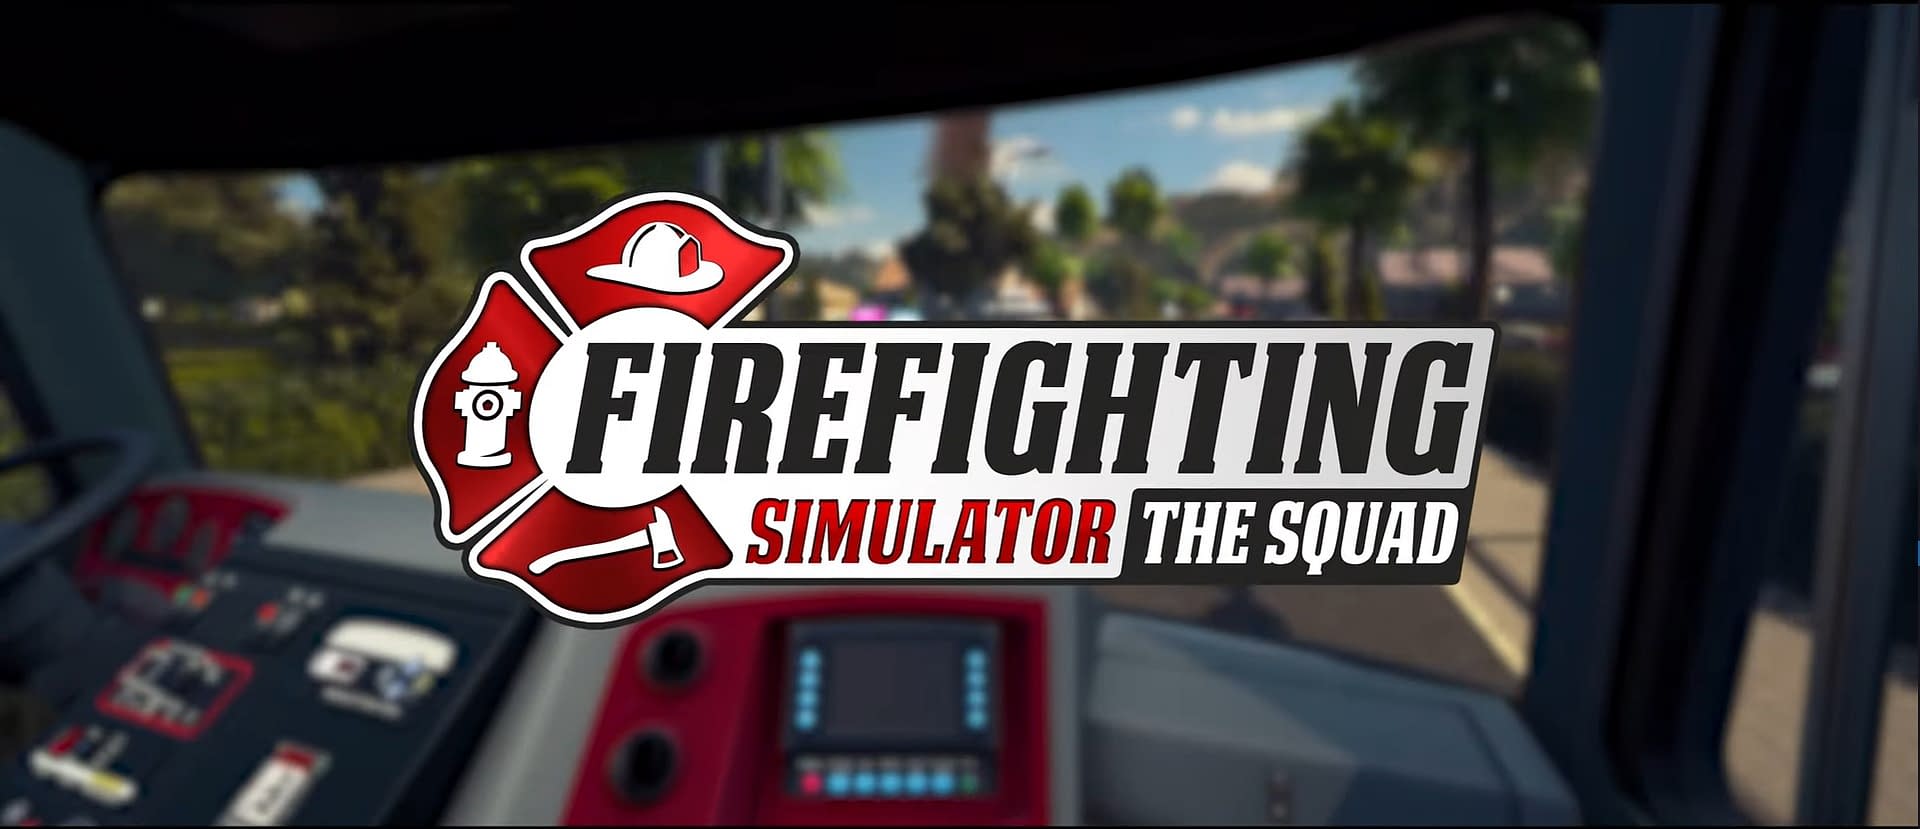 Firefighting Simulator – The Squad To Arrive On Consoles